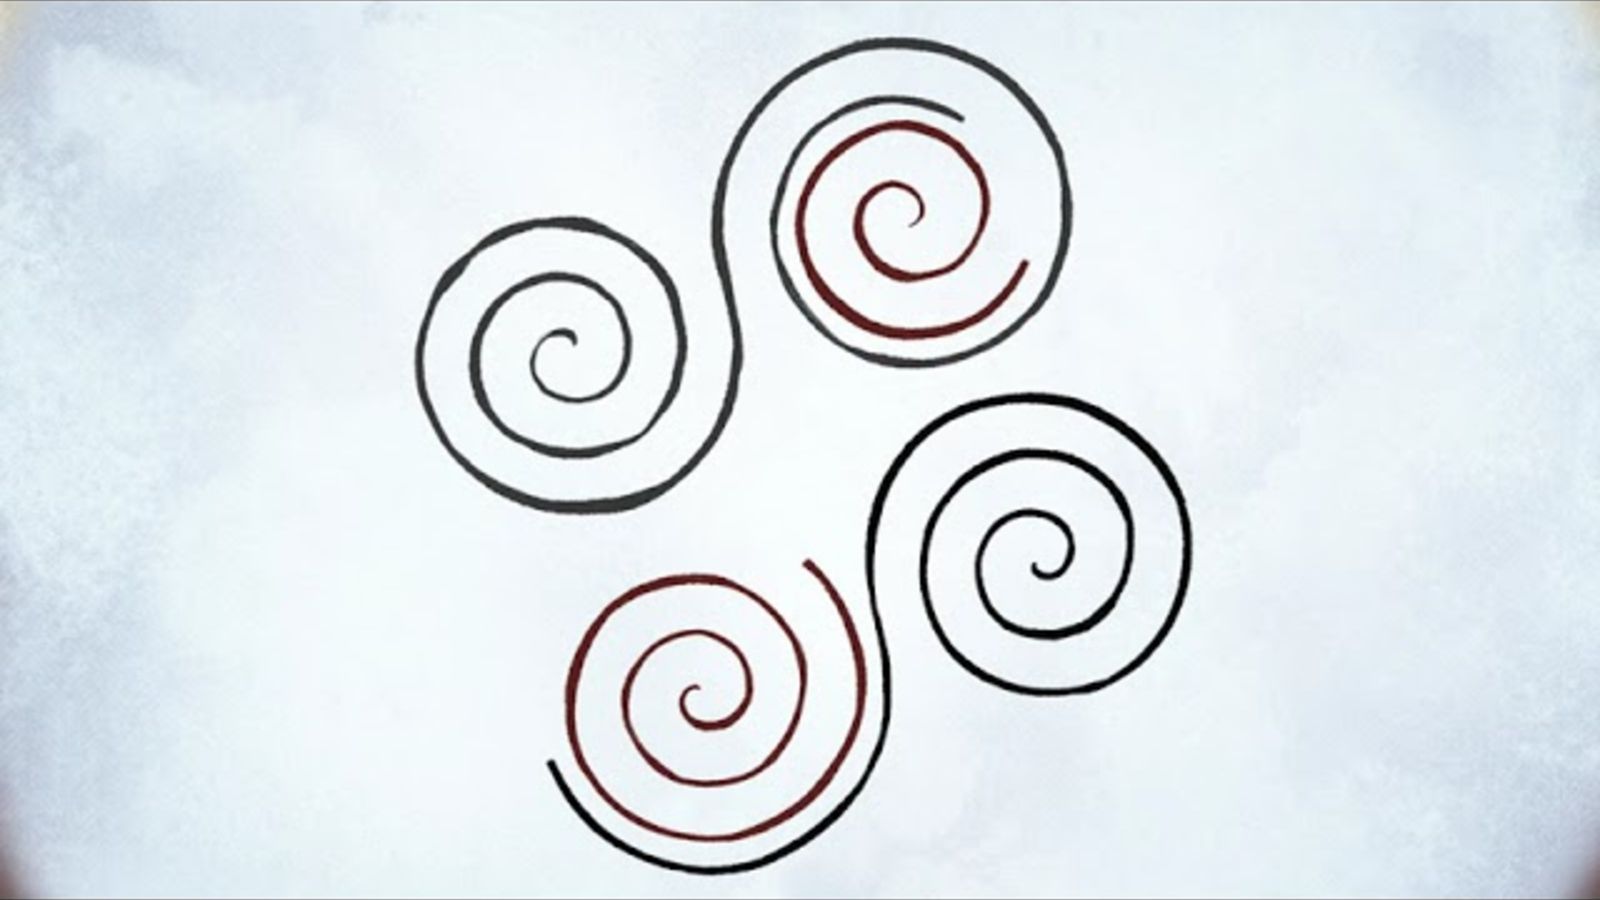 An abstract black spiral pattern on a grey background.